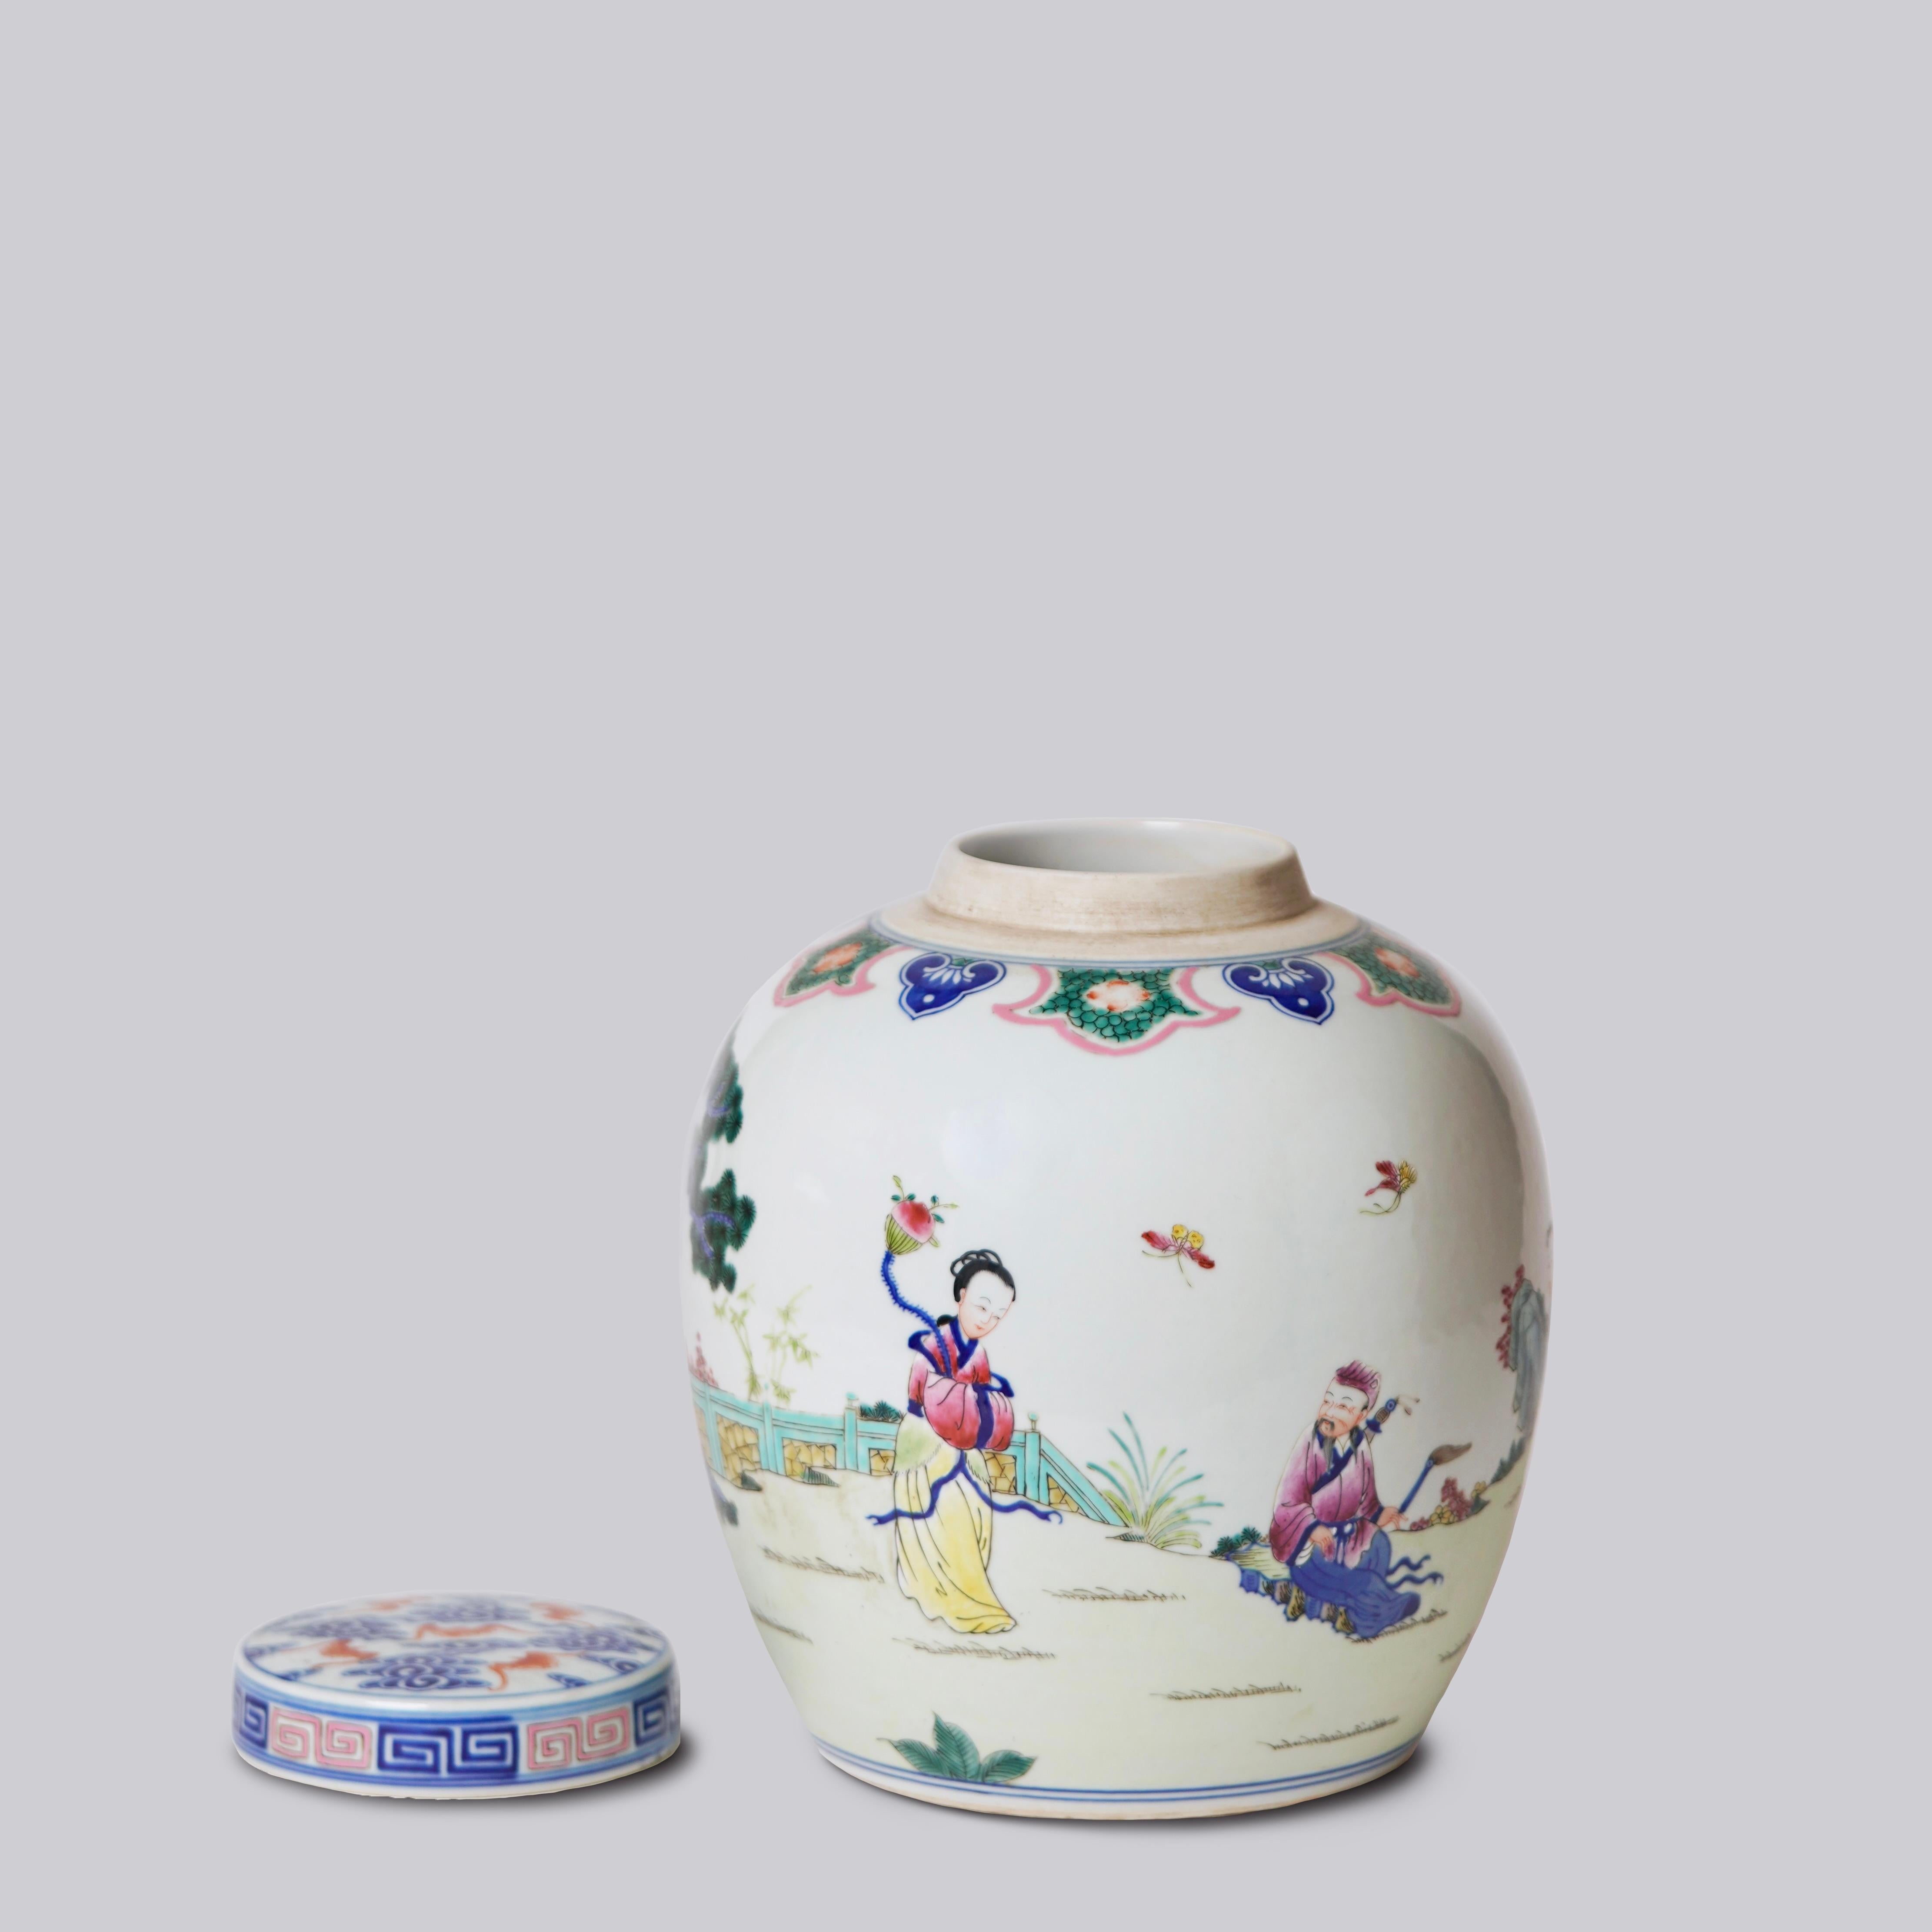 Fired Unique Vintage Famille Bleu Eight Immortals Porcelain Lidded Container